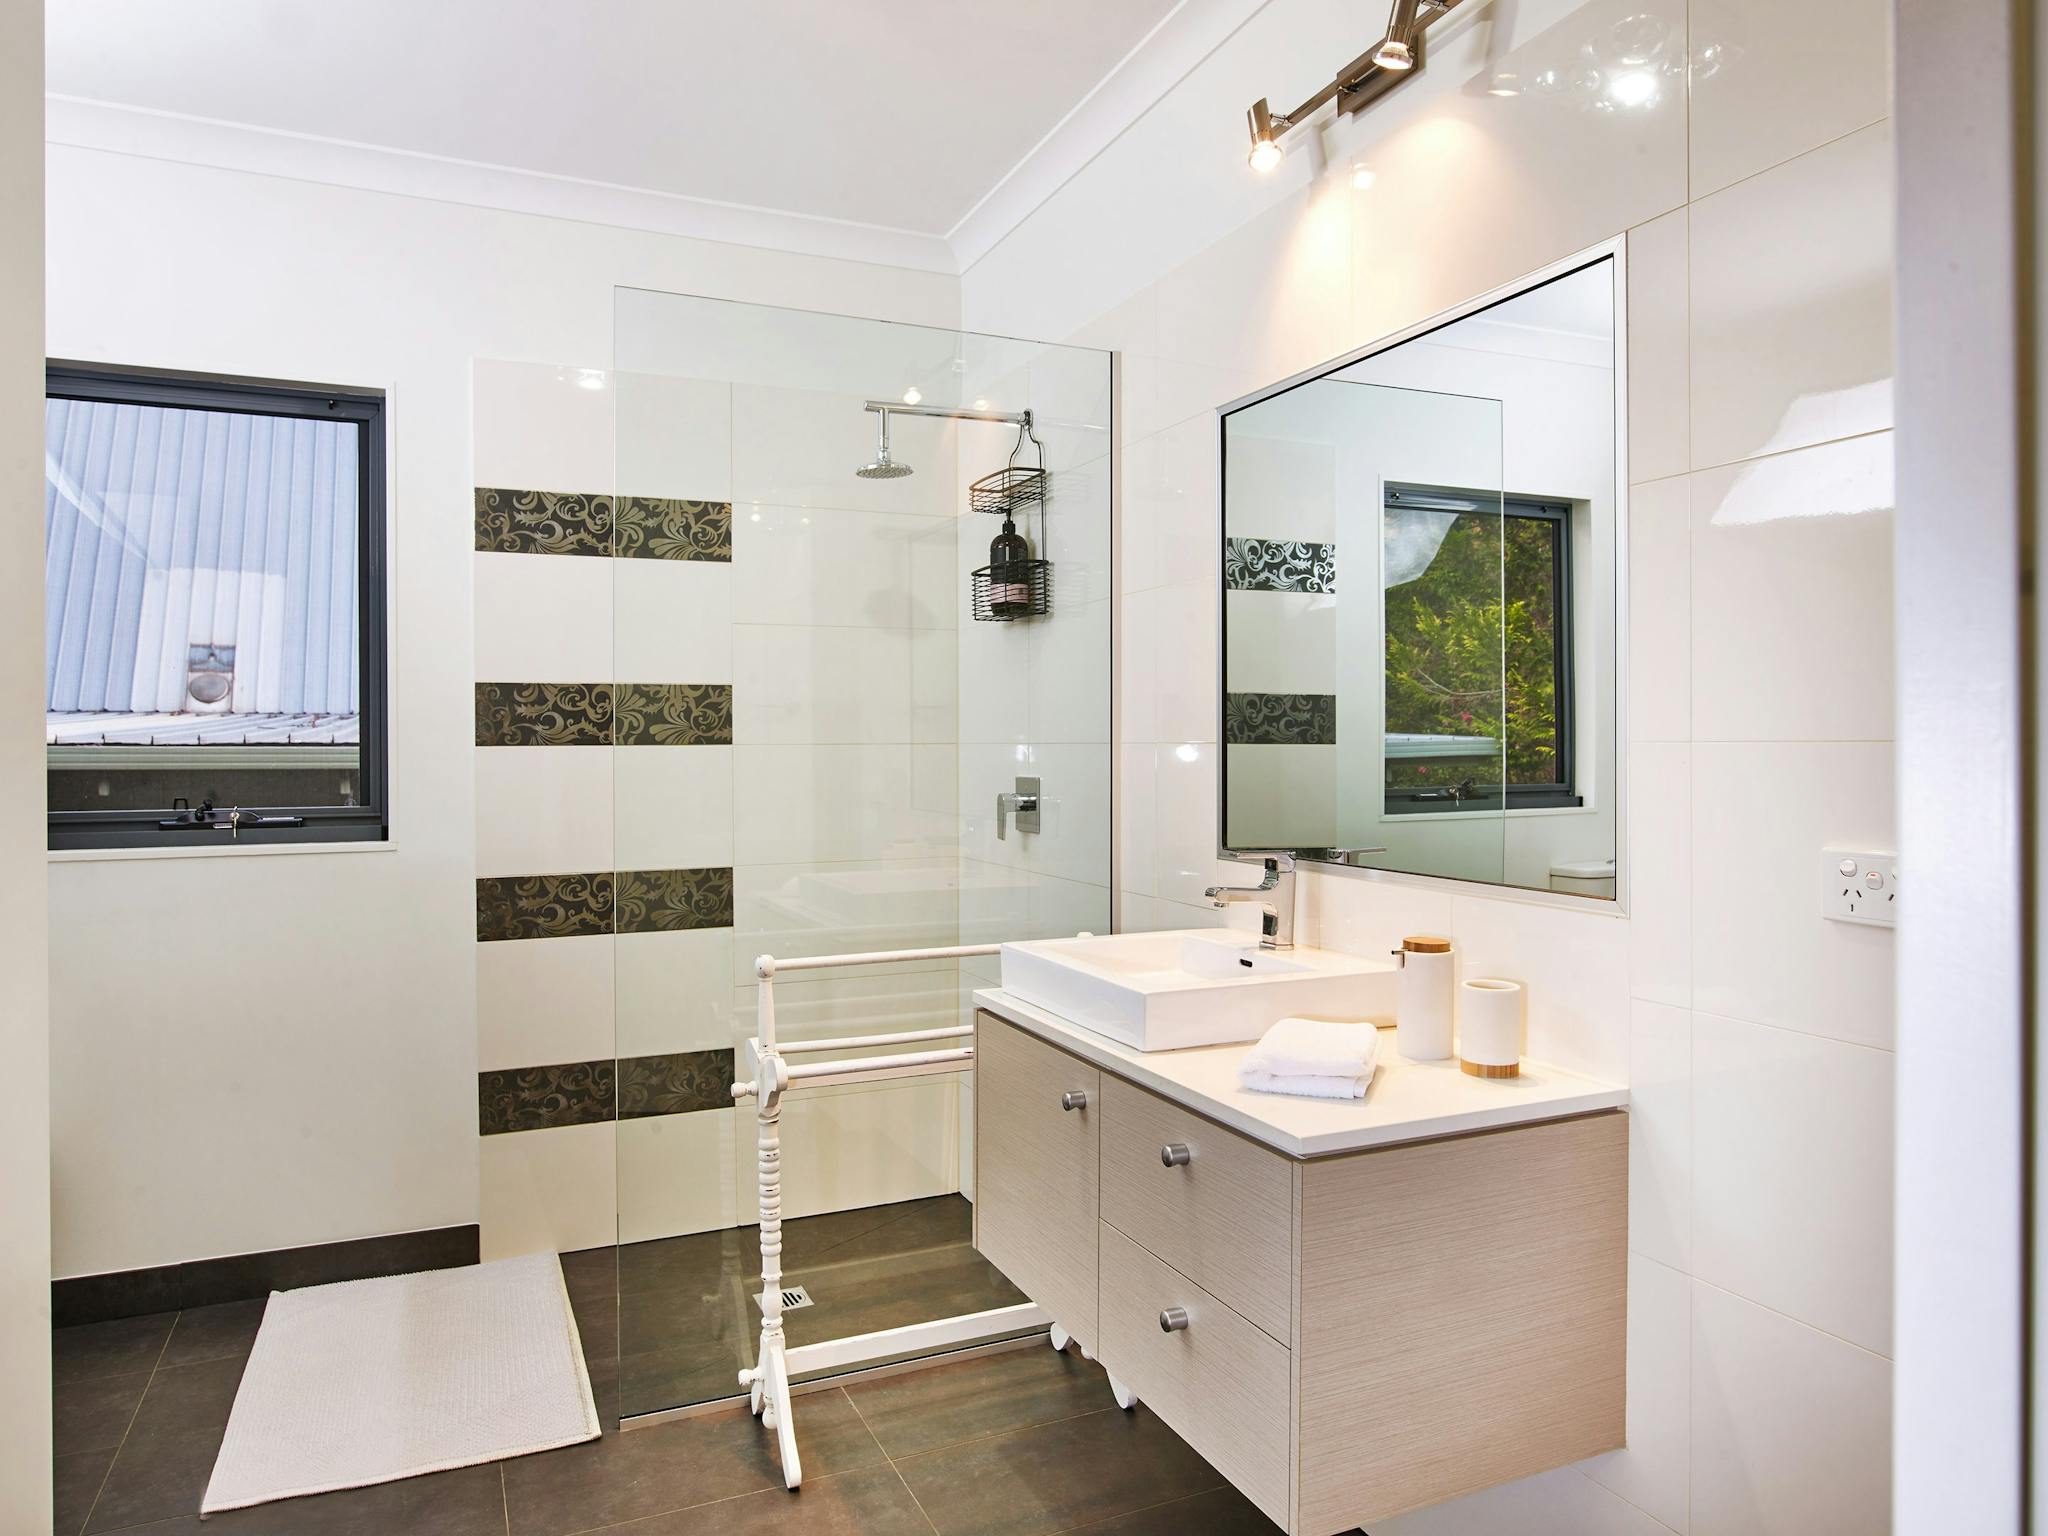 Wash away you troubles in this spacious bathroom, all linen supplied